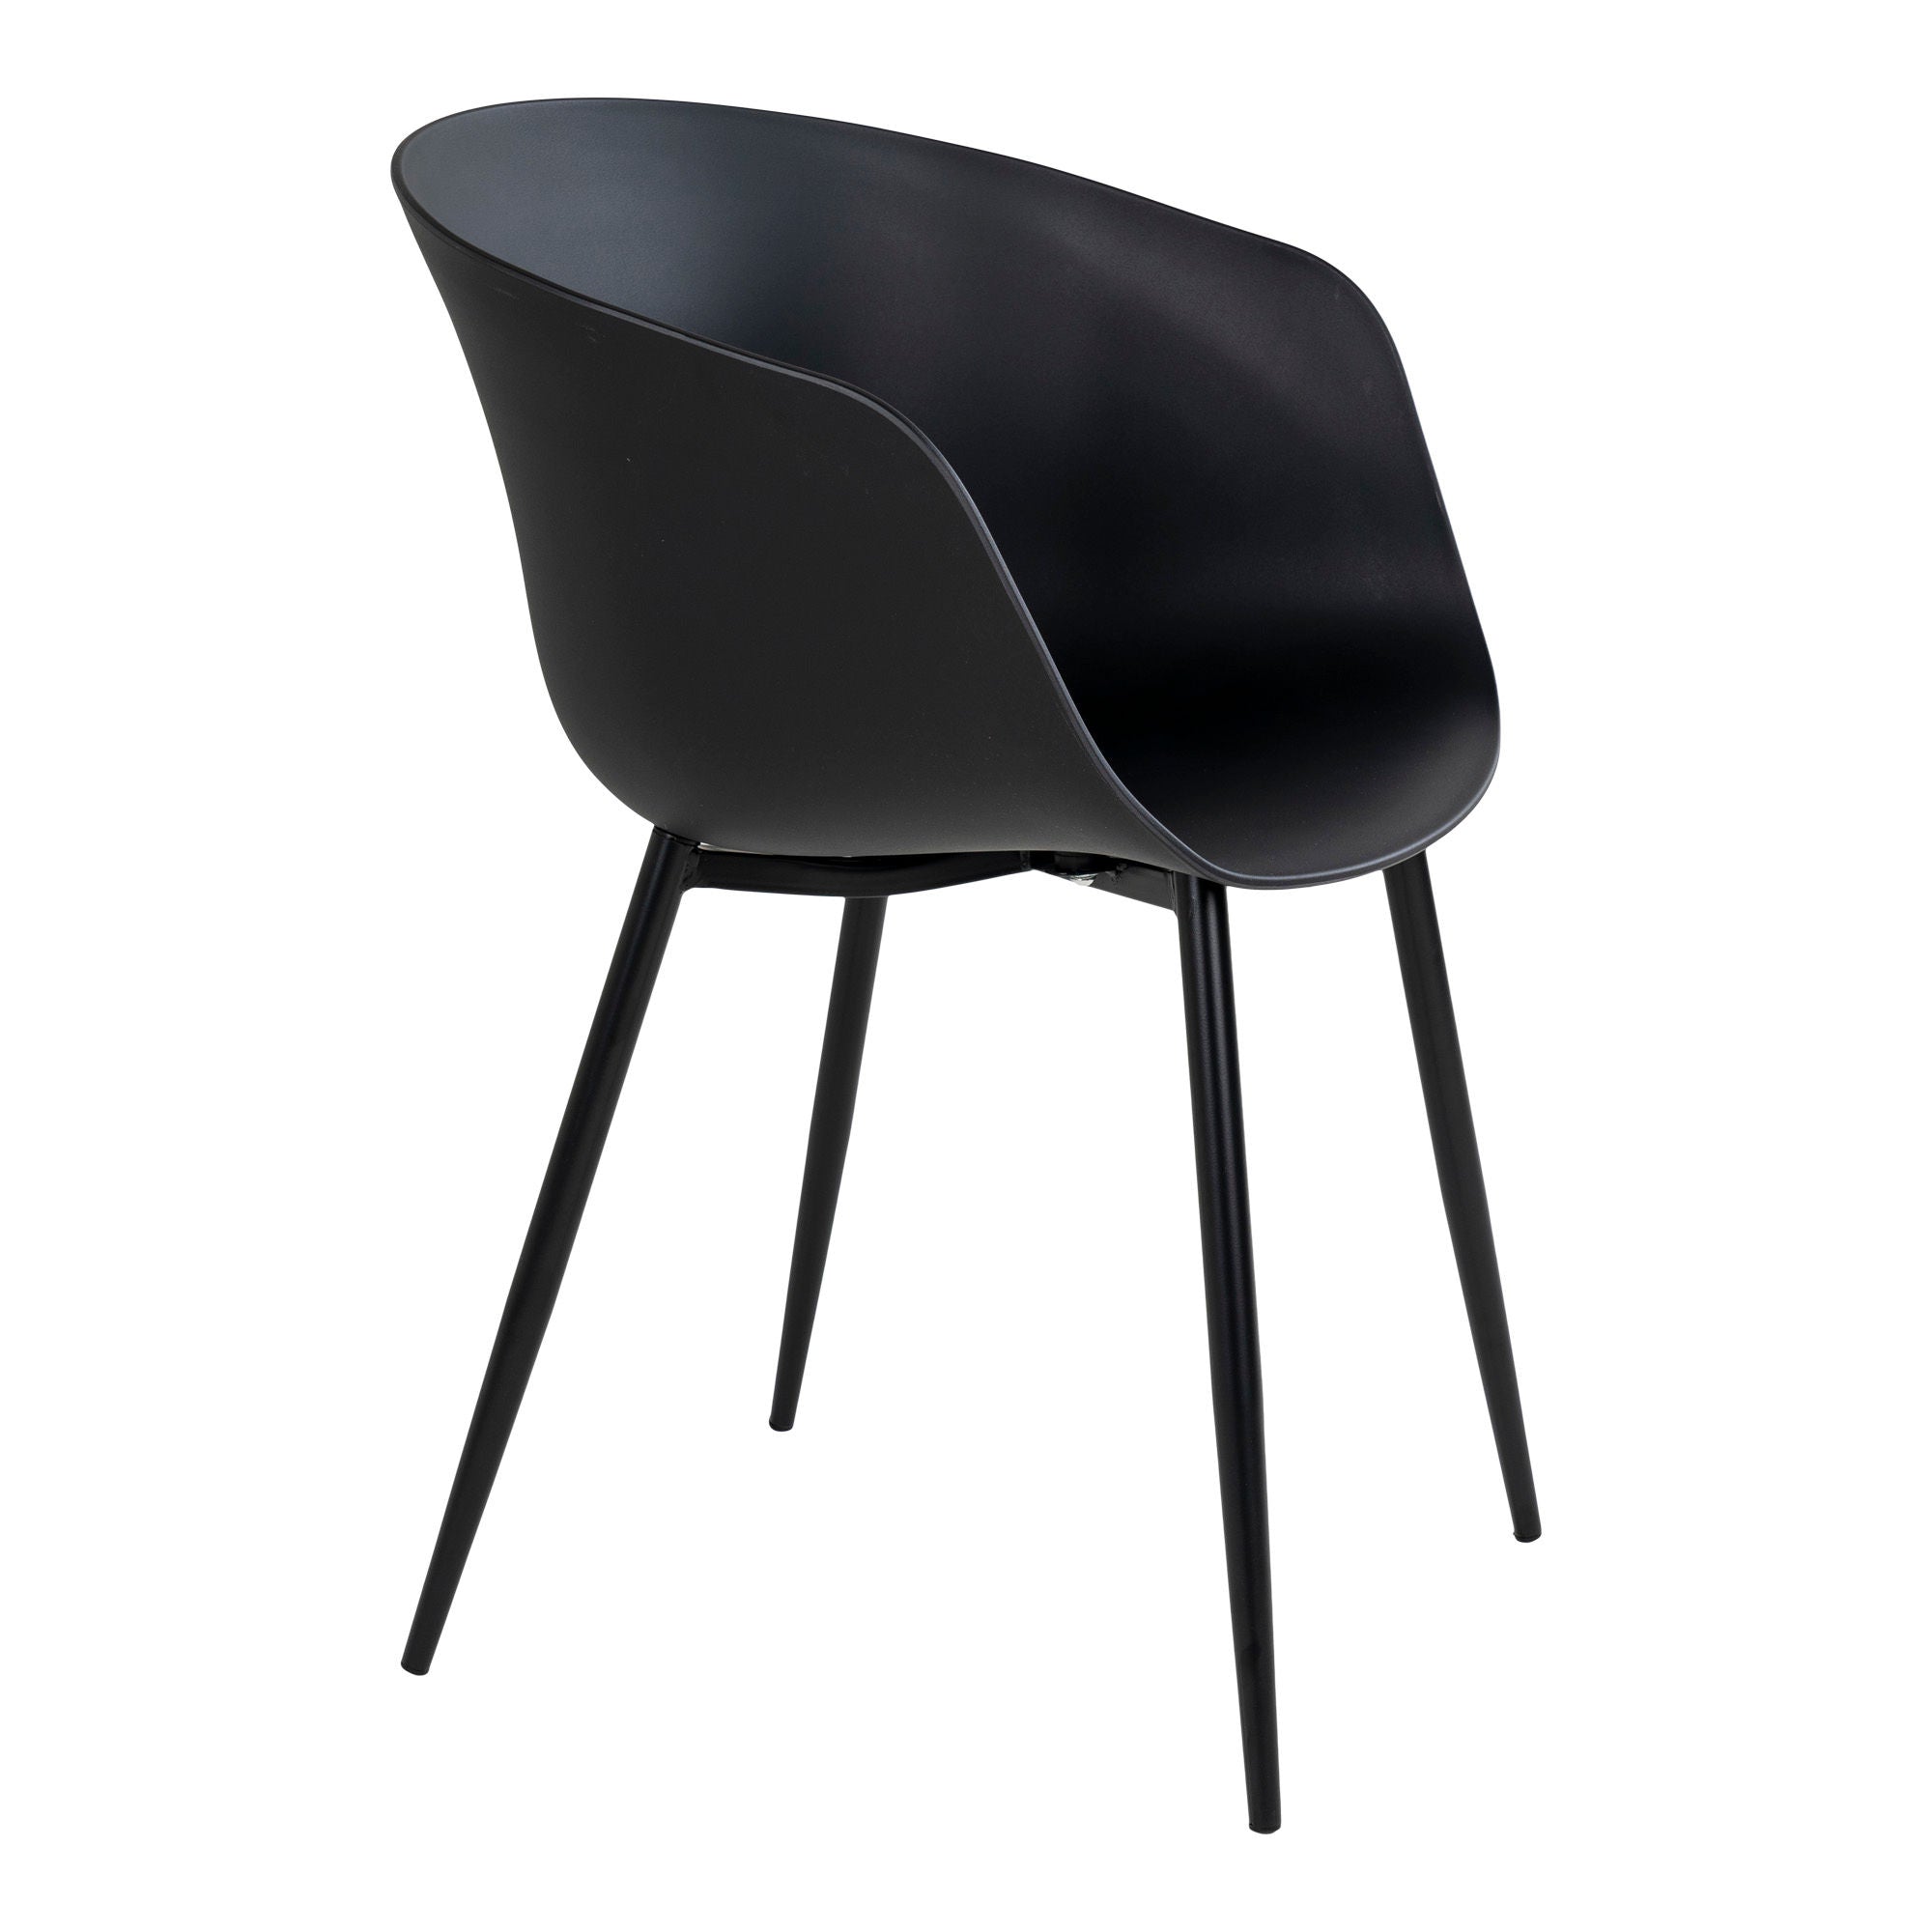 House Nordic - Roda Dining Table Chair